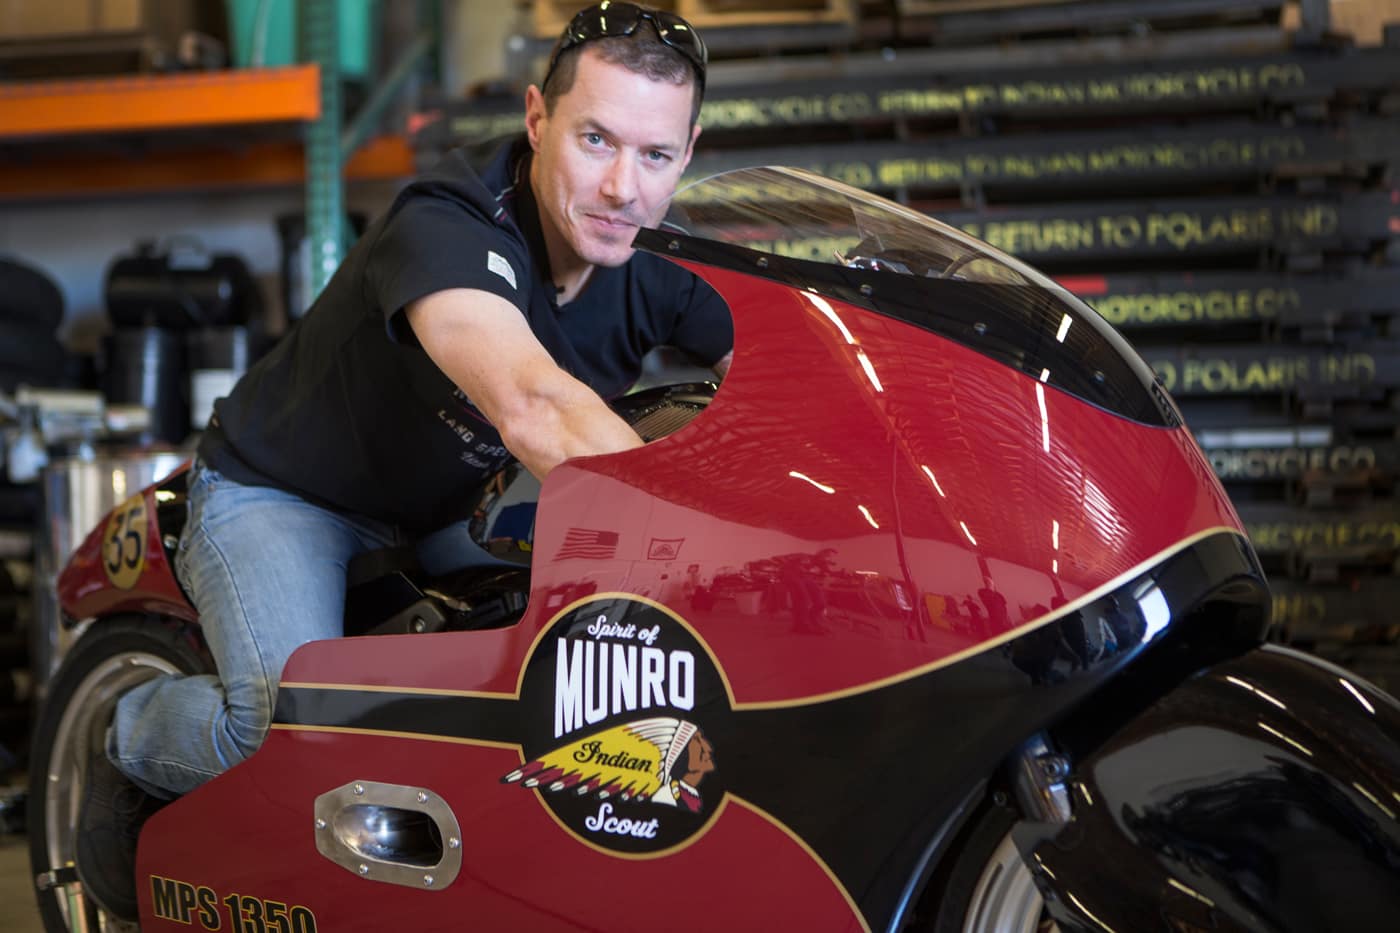 Spirit of Munro motorcycle - honoring the legacy of a land speed legend